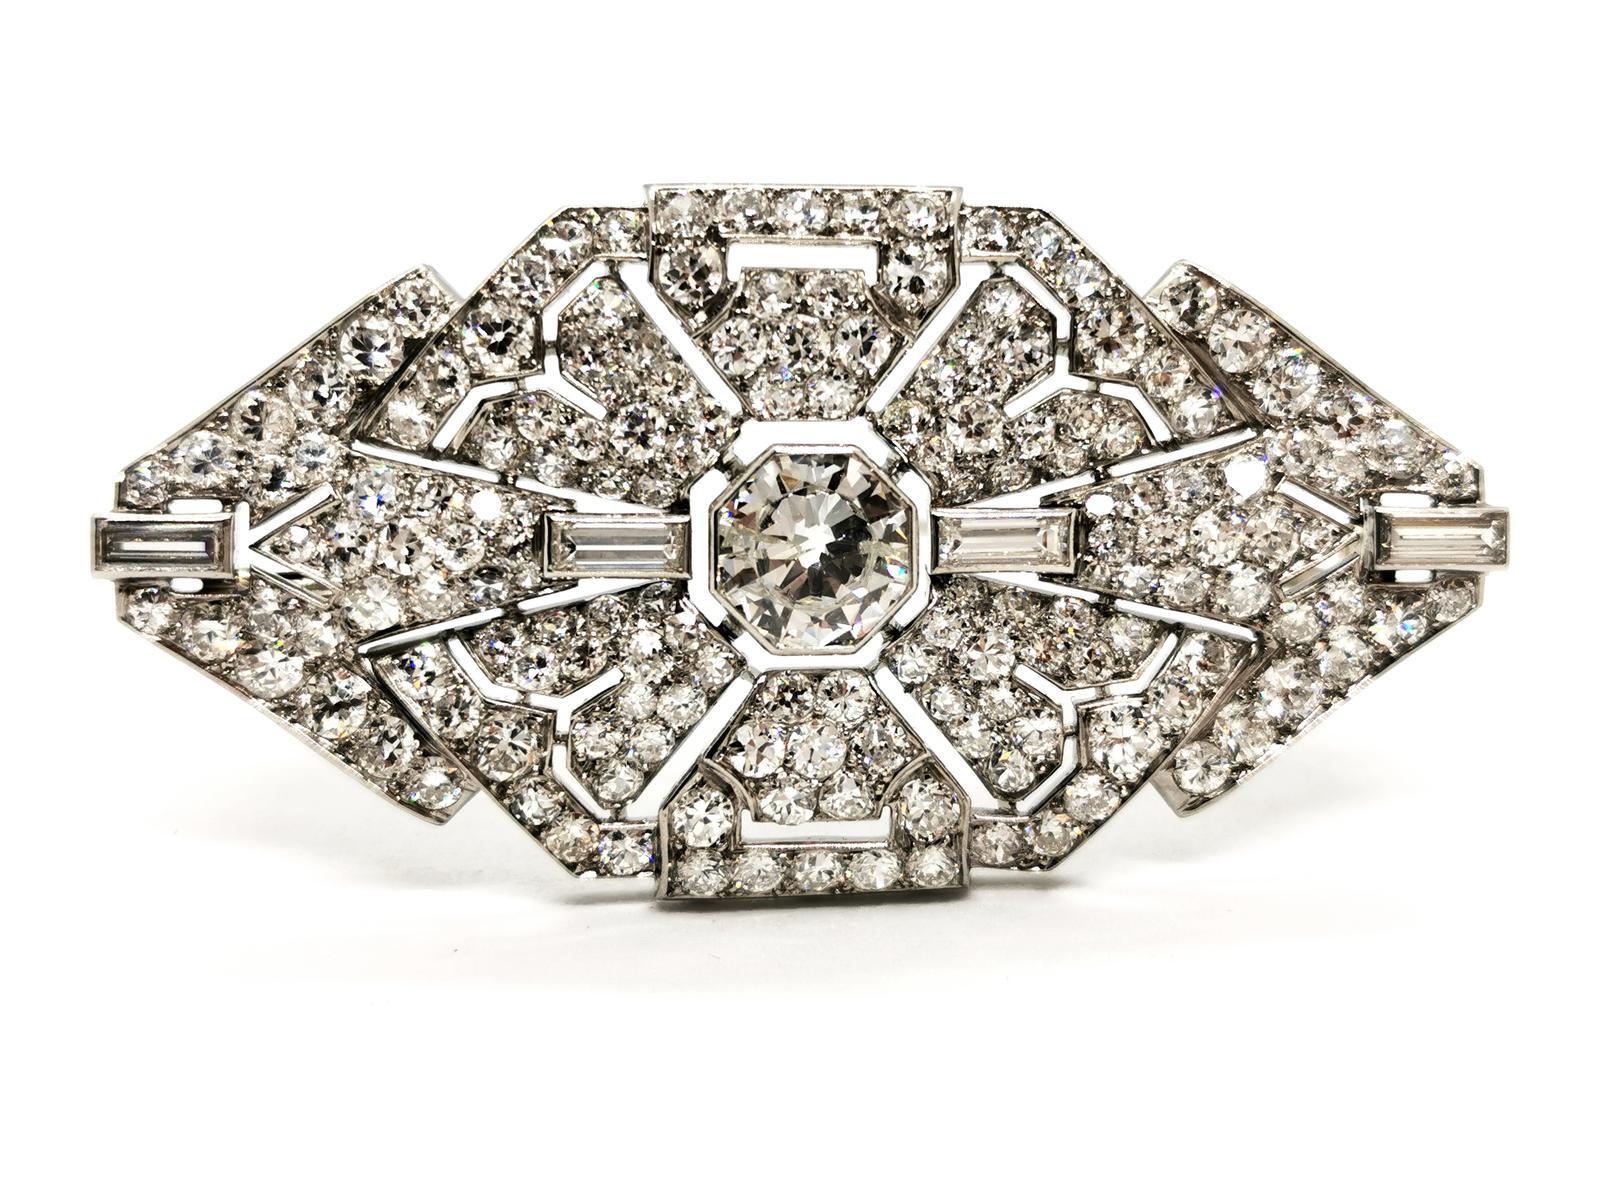 Art Deco brooch in white gold 750 thousandths (18 carats) and platinum 950 thousandths. stacked in the center of a brilliant diamond of about 1.49 ct. supported by 4 baguette diamonds of about 0.05 ct each. surrounded by 166 brilliant diamonds. (12